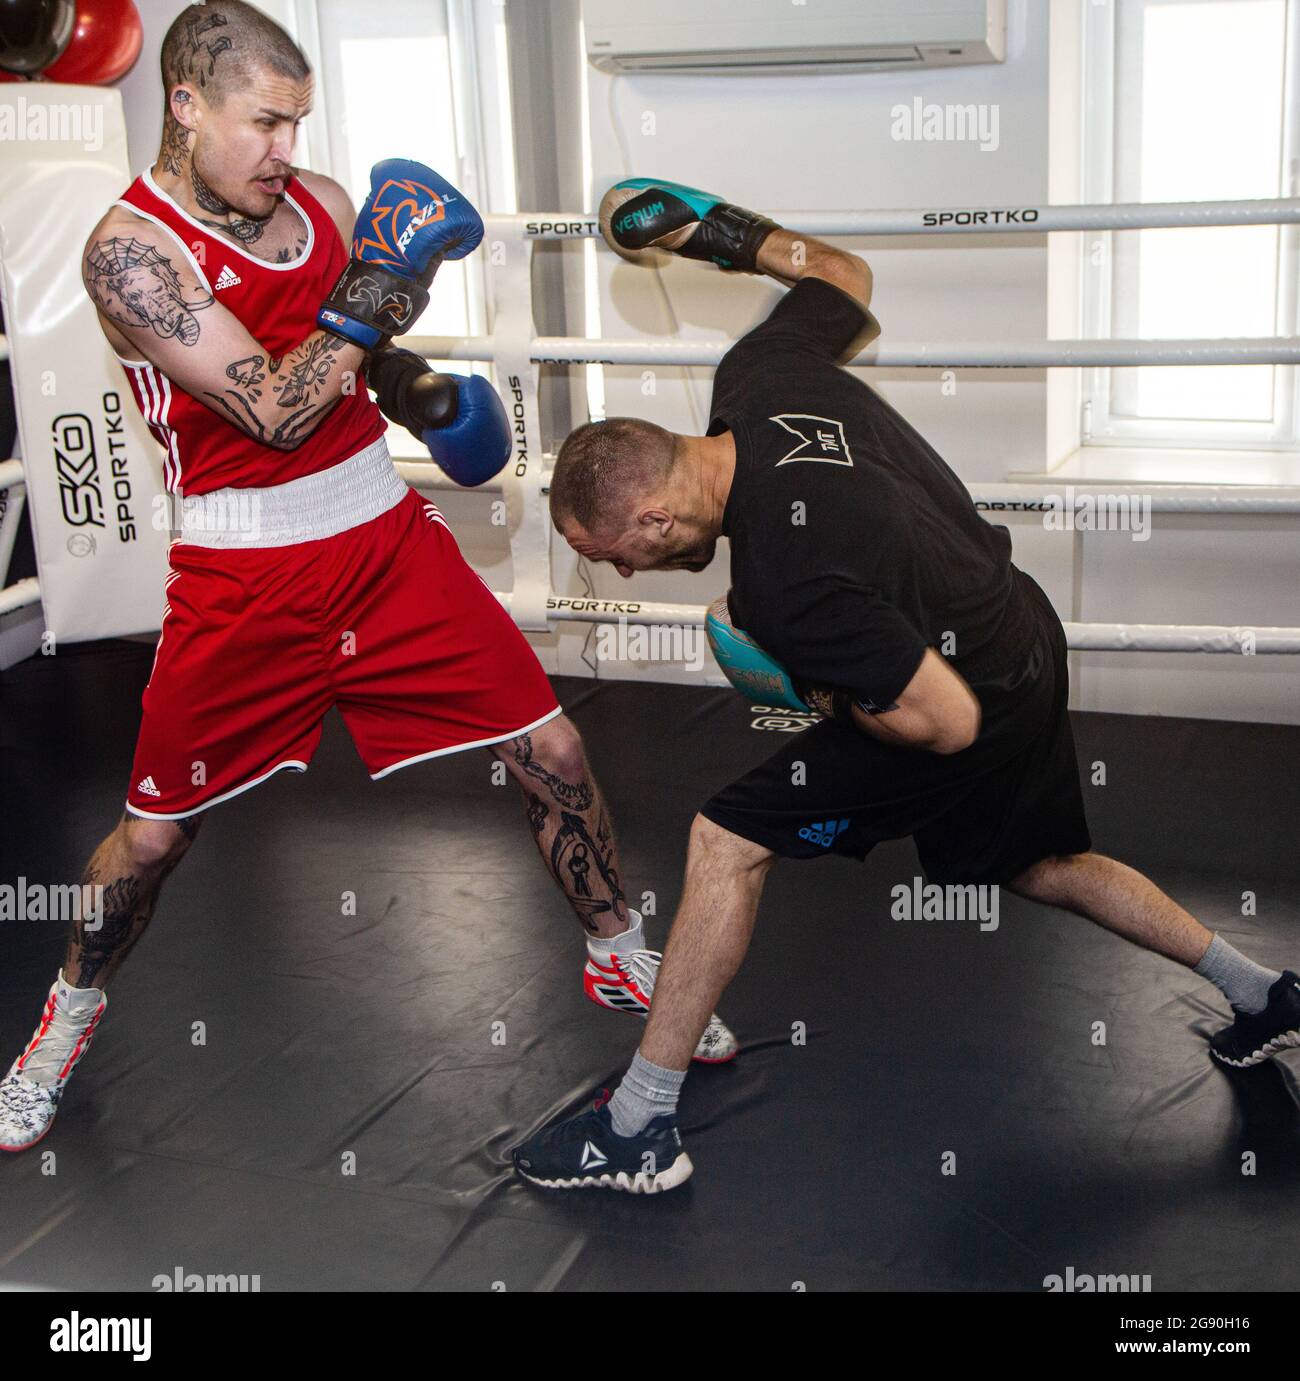 Two Ukrainian boxers square it off in the newly open boxing gym Versus, with the boxing popularity in the country rising and many new gyms opening Stock Photo